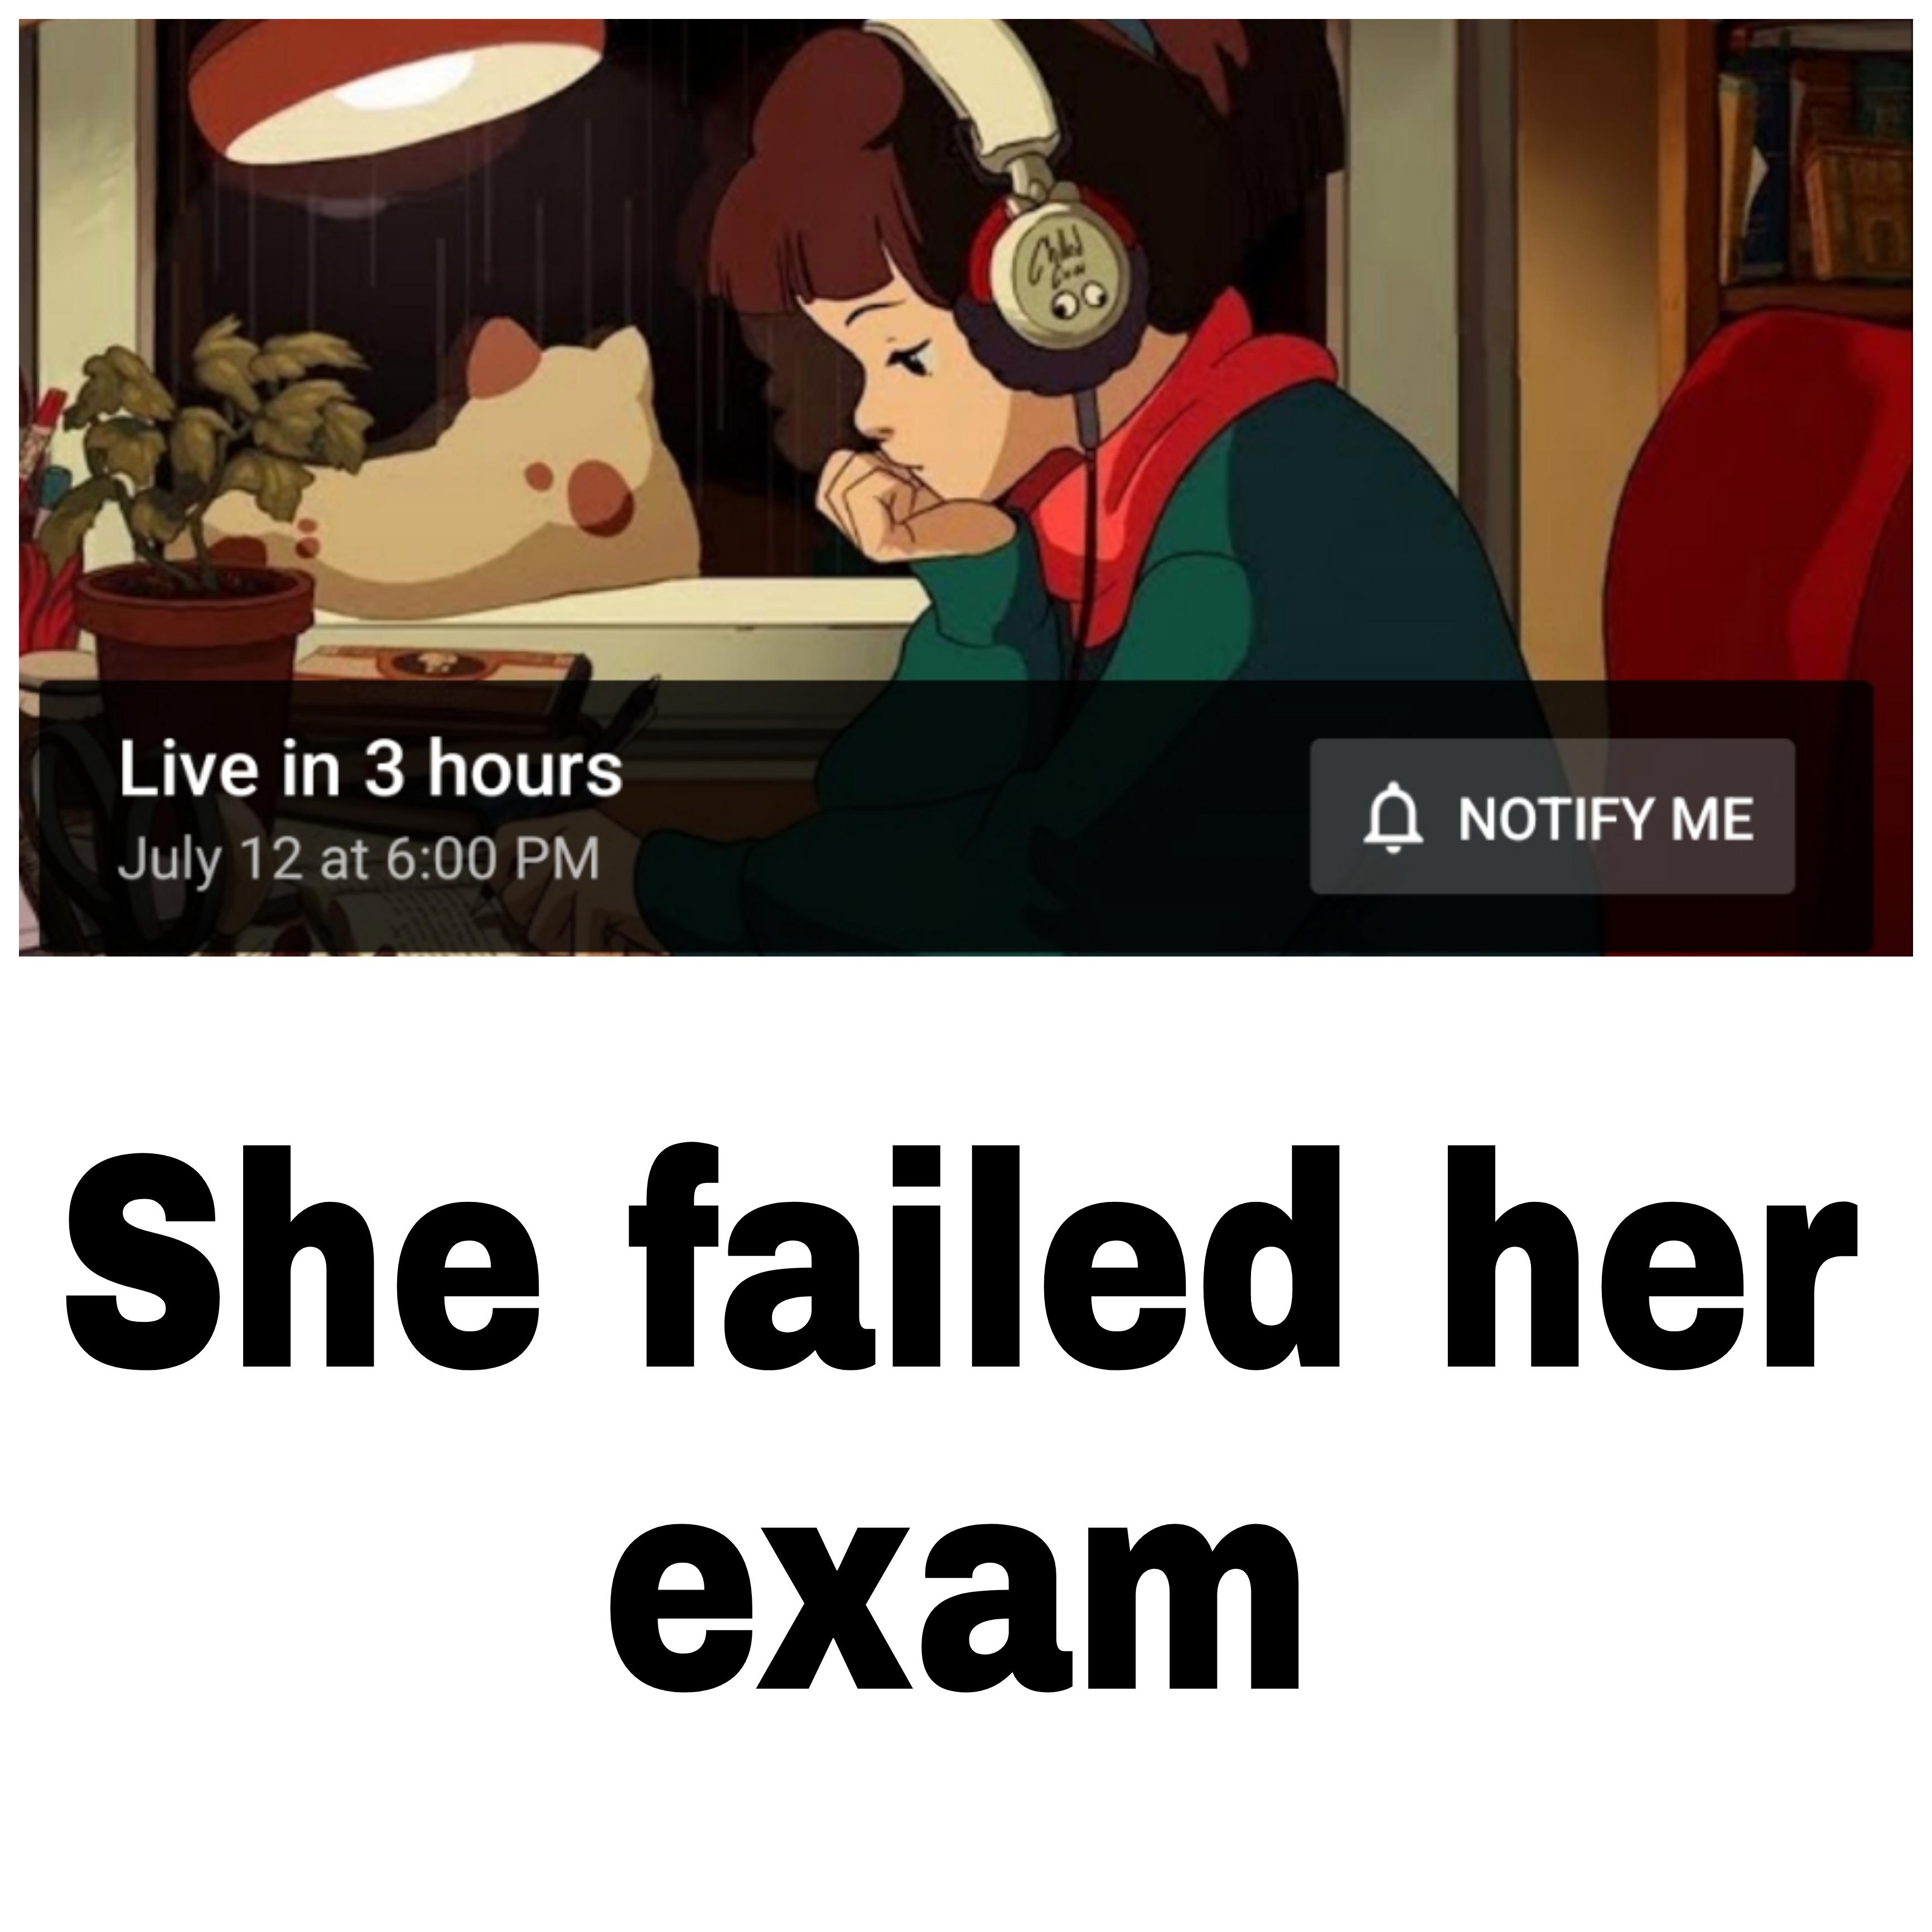 dank memes - lofi hip hop radio - Live in 3 hours July 12 at W A Notify Me She failed her exam